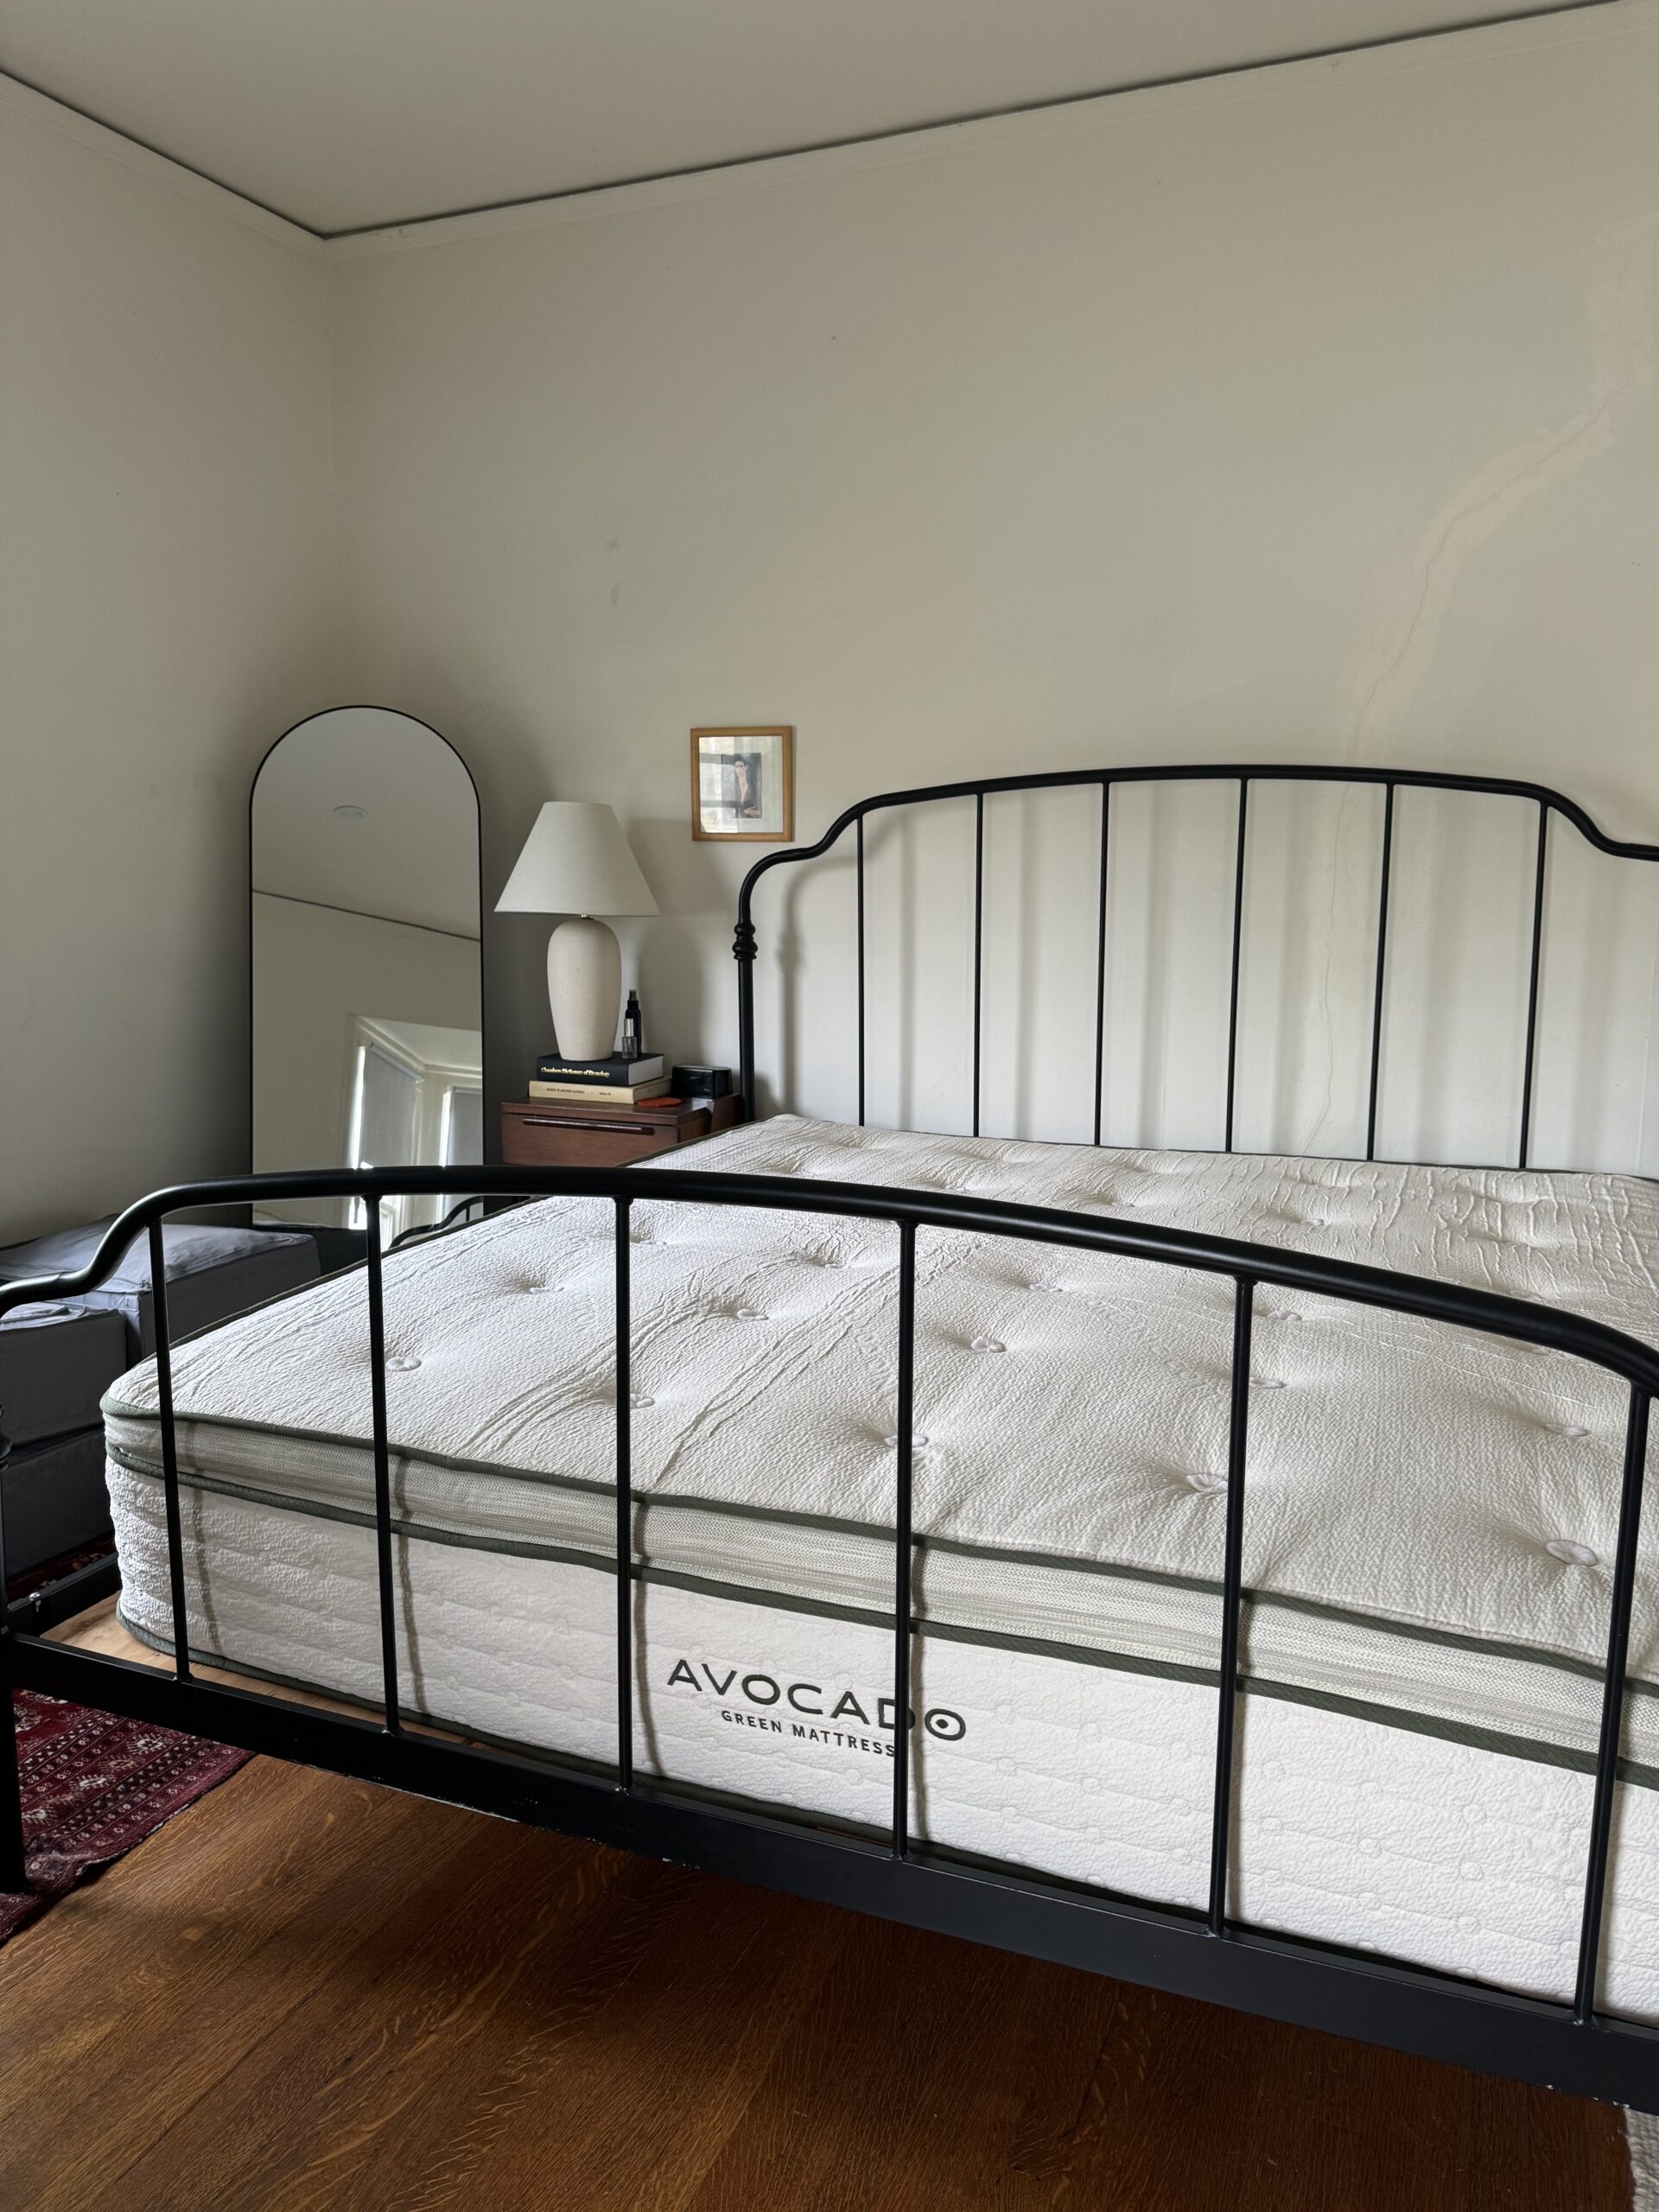 A tidy bedroom featuring a black metal frame bed with a white puffy mattress, matching bedside table with lamp, and an arched mirror against a light gray wall.